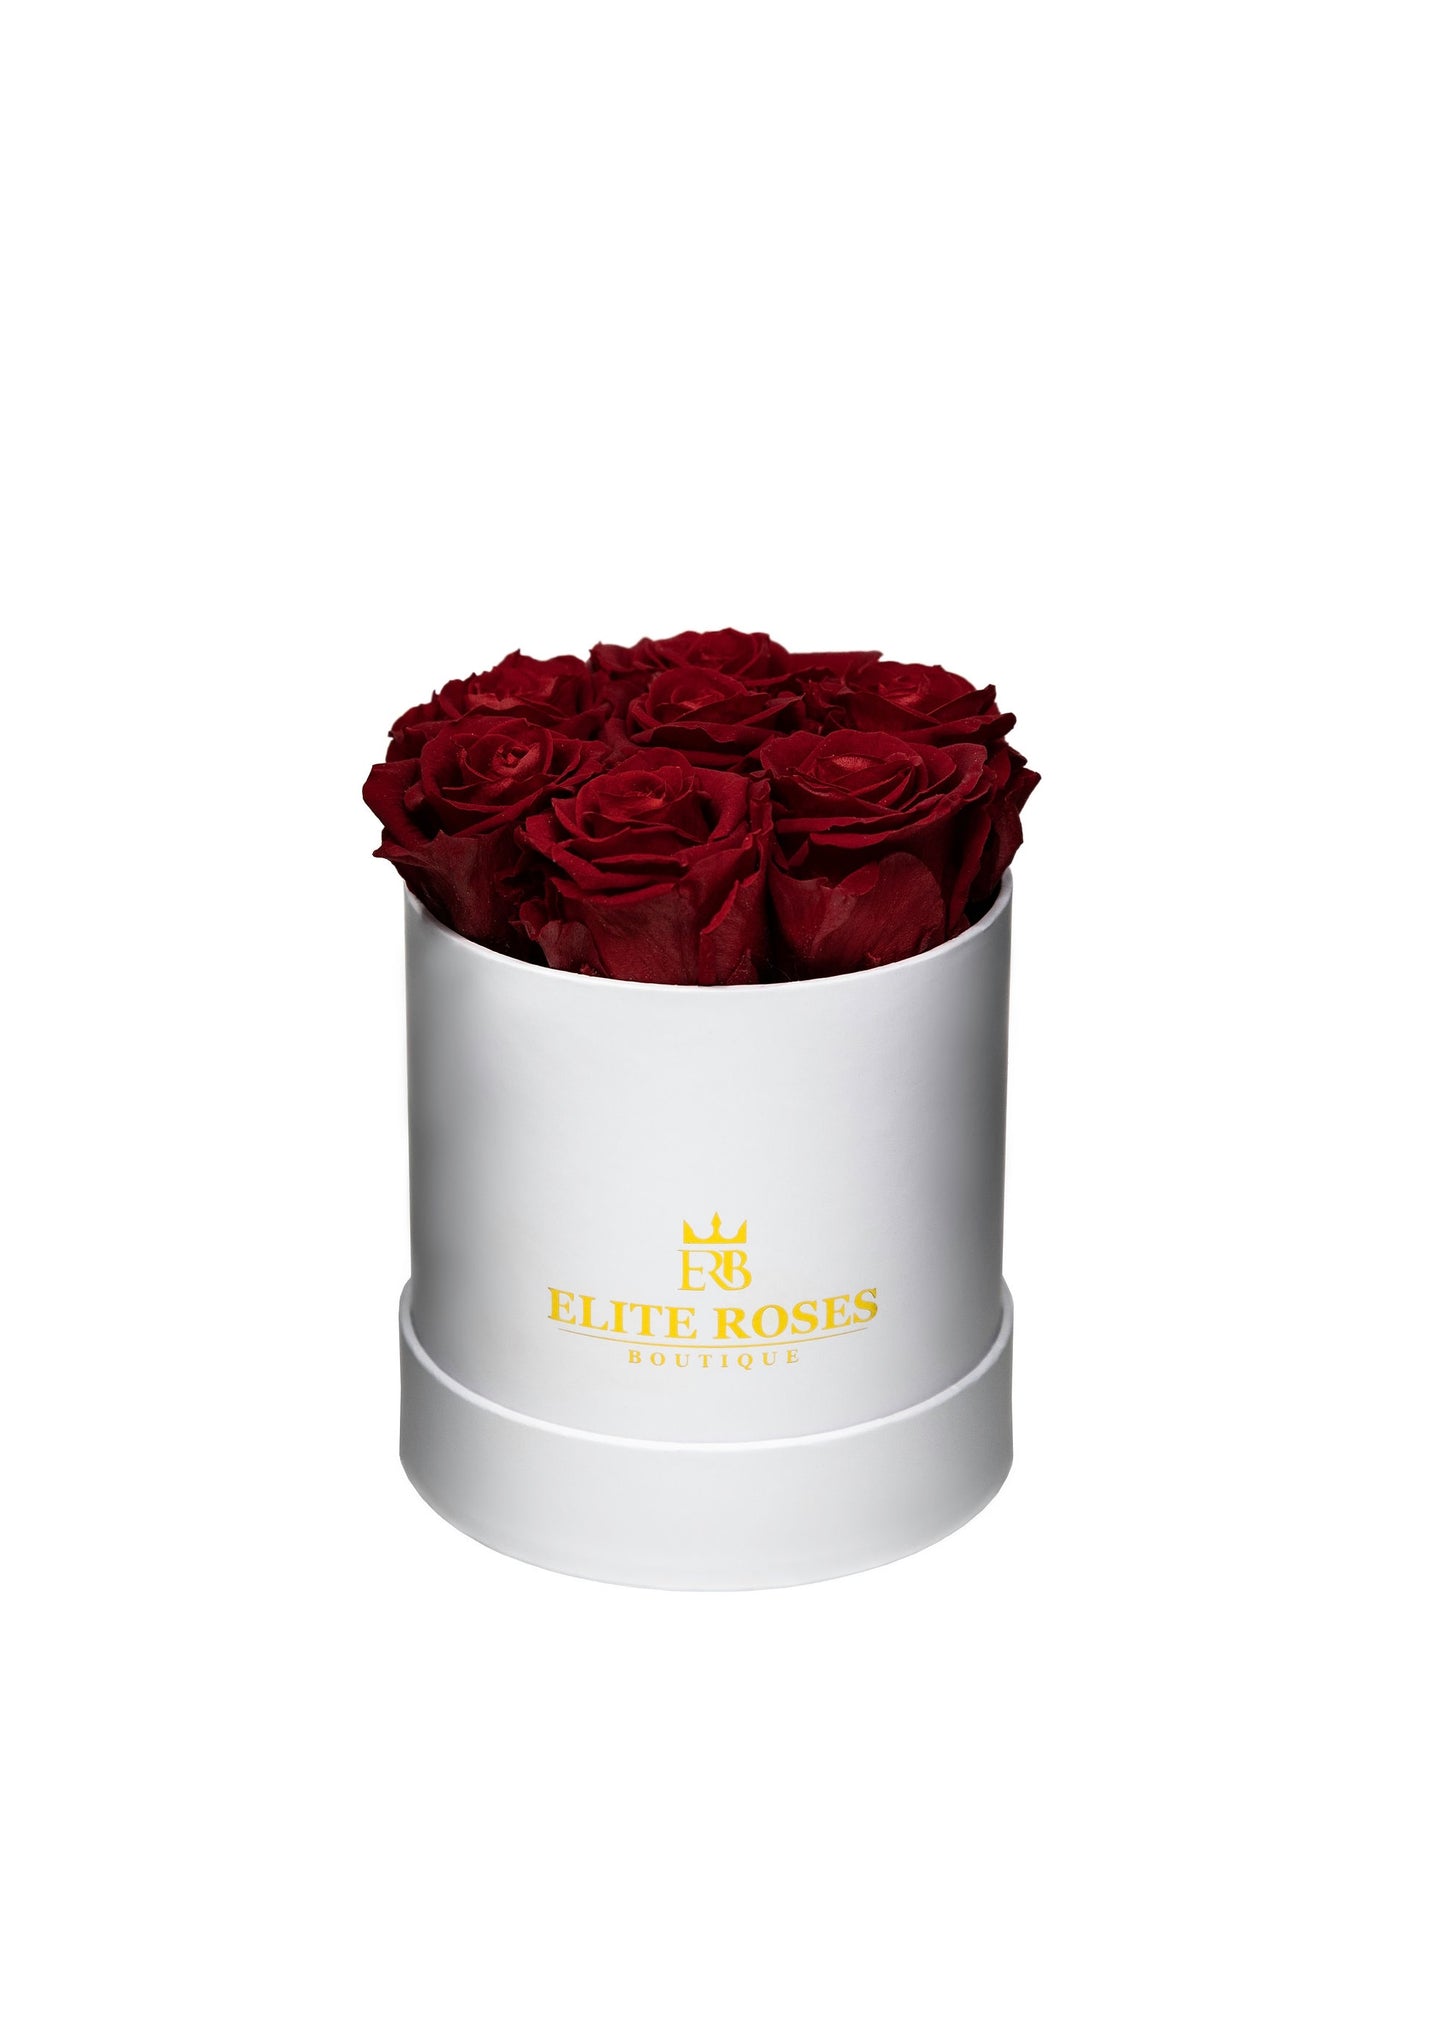 Dark red roses in a small round box